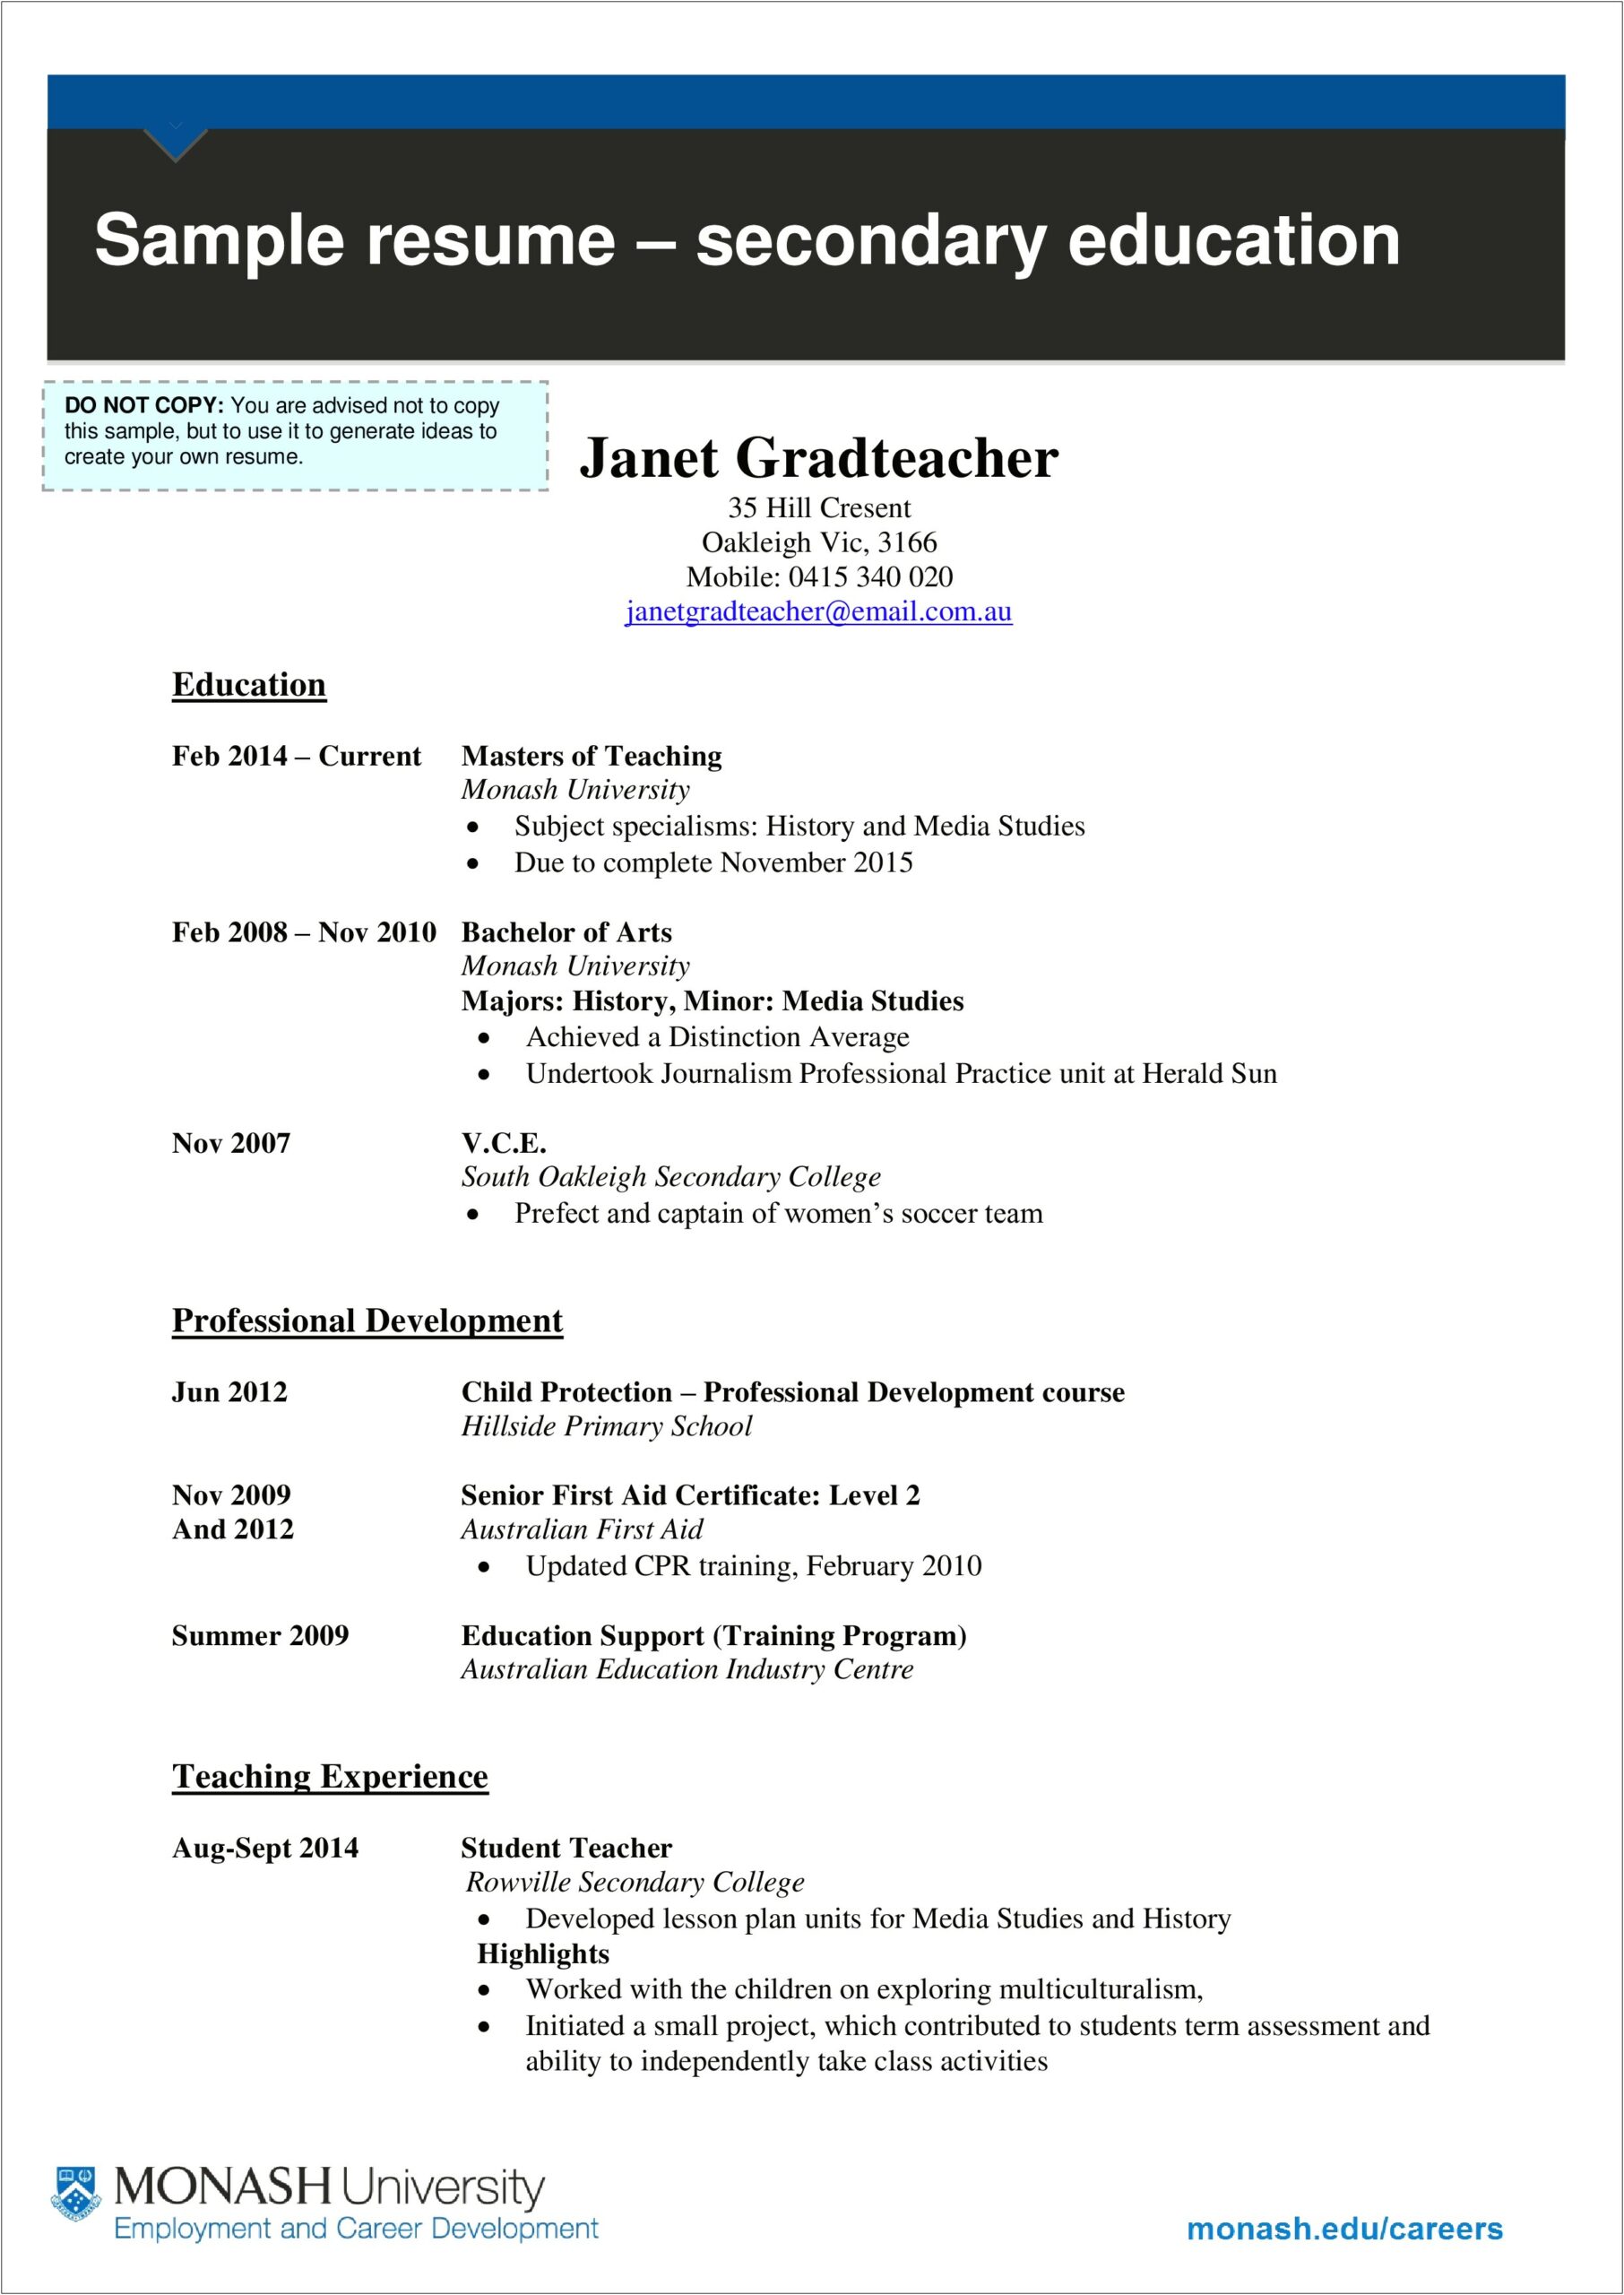 Teachers Fresh Out Of School Resume Examples